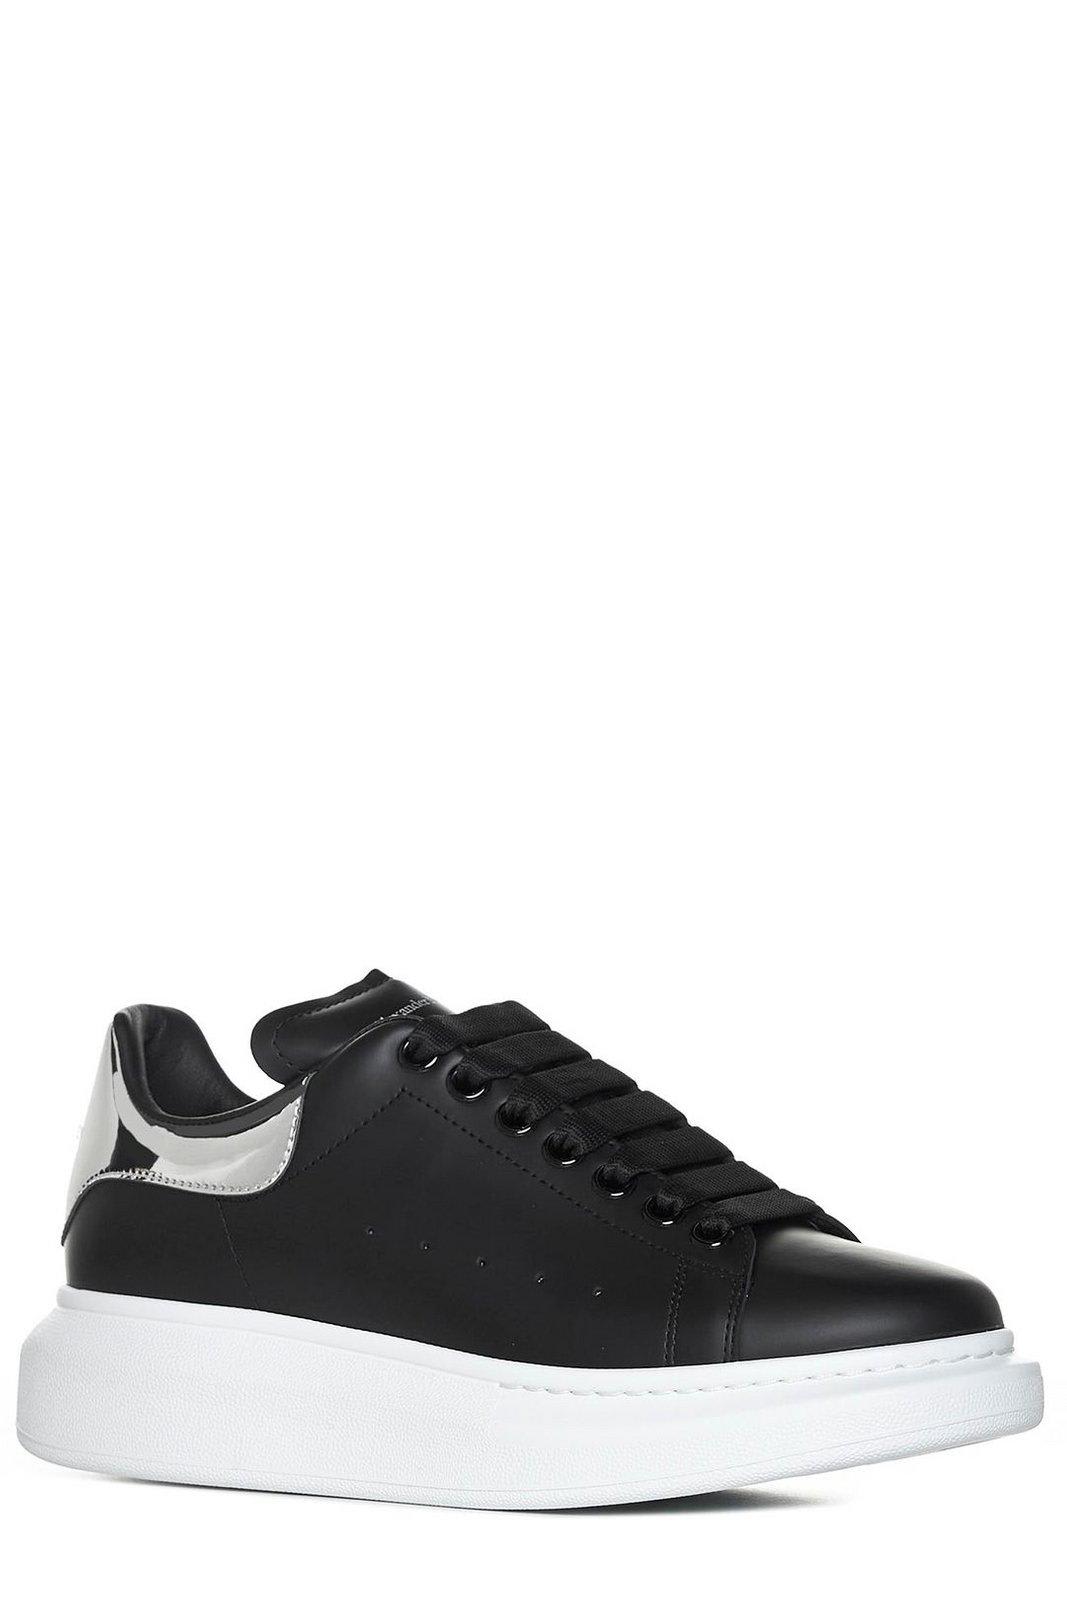 Shop Alexander Mcqueen Round Toe Laced Sneakers In Black